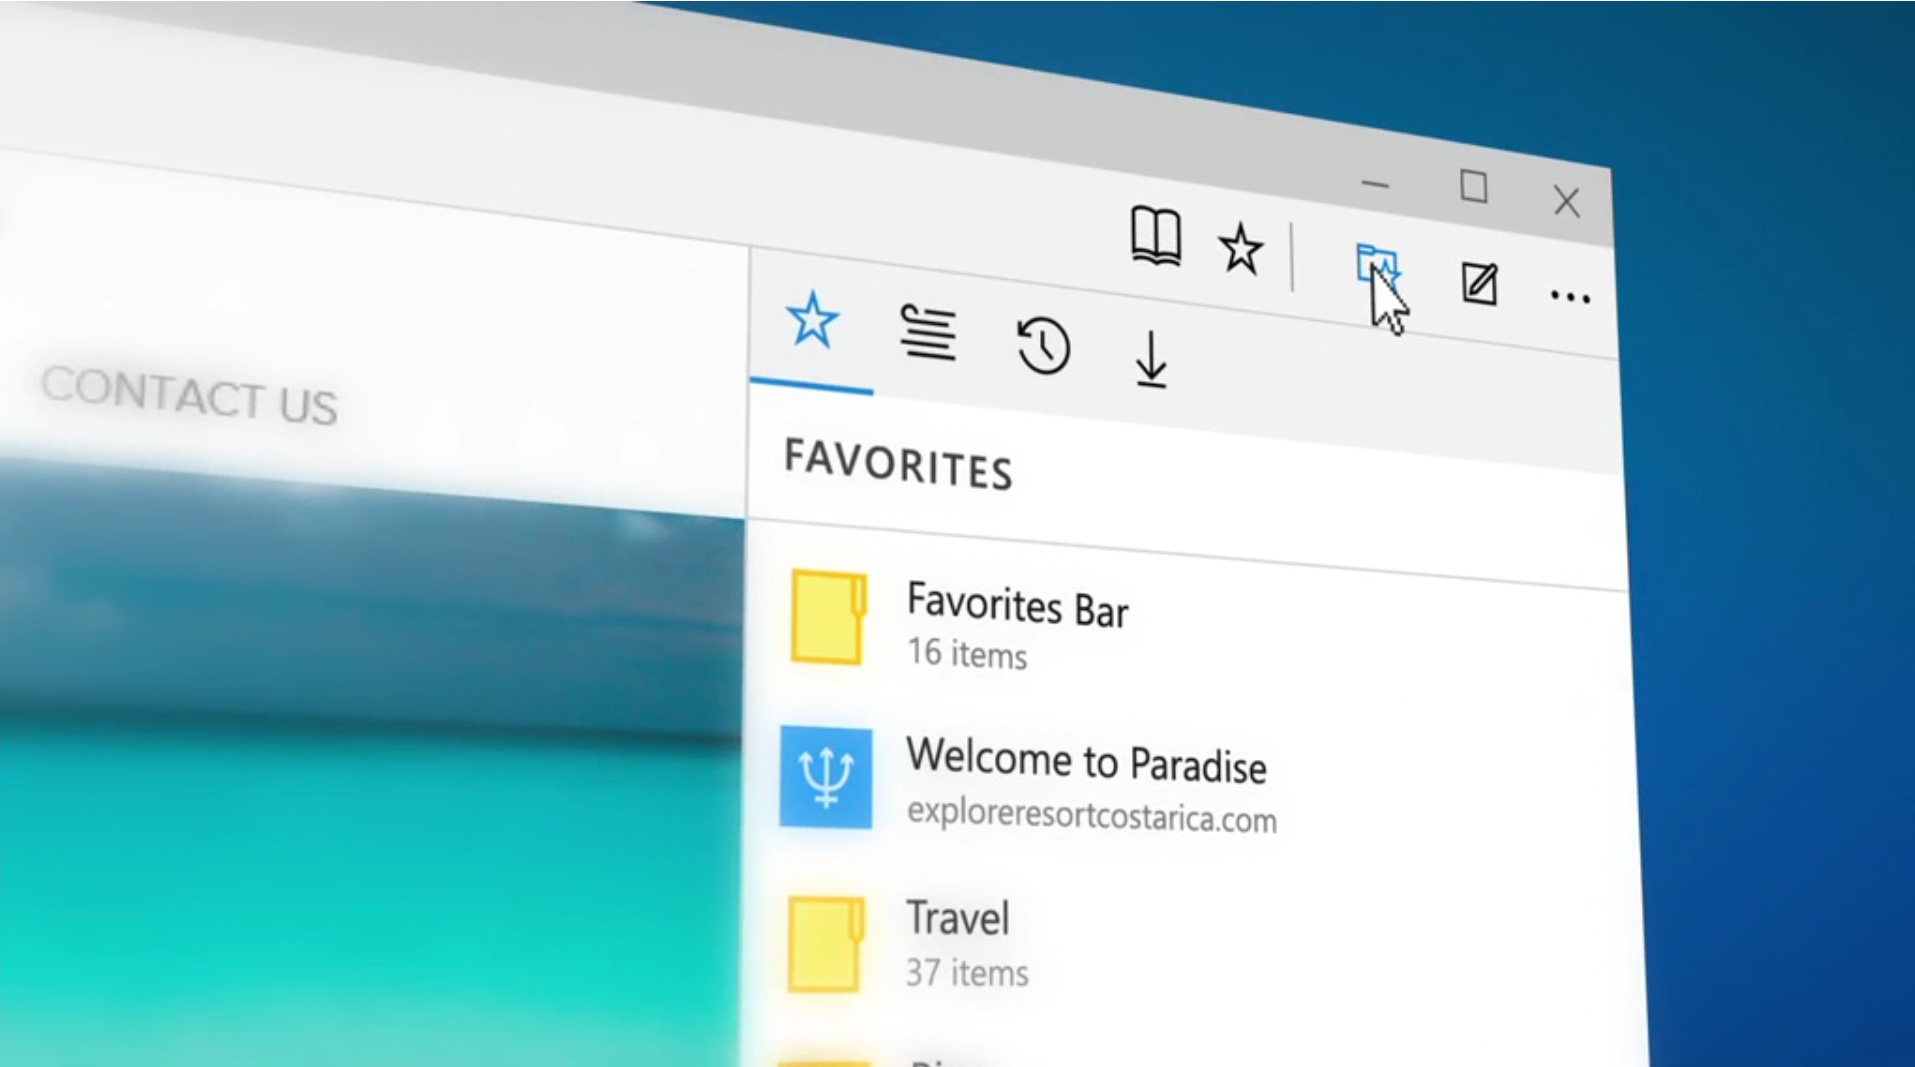 WOF: Project Spartan, MS Edge, would you use a Microsoft browser again?